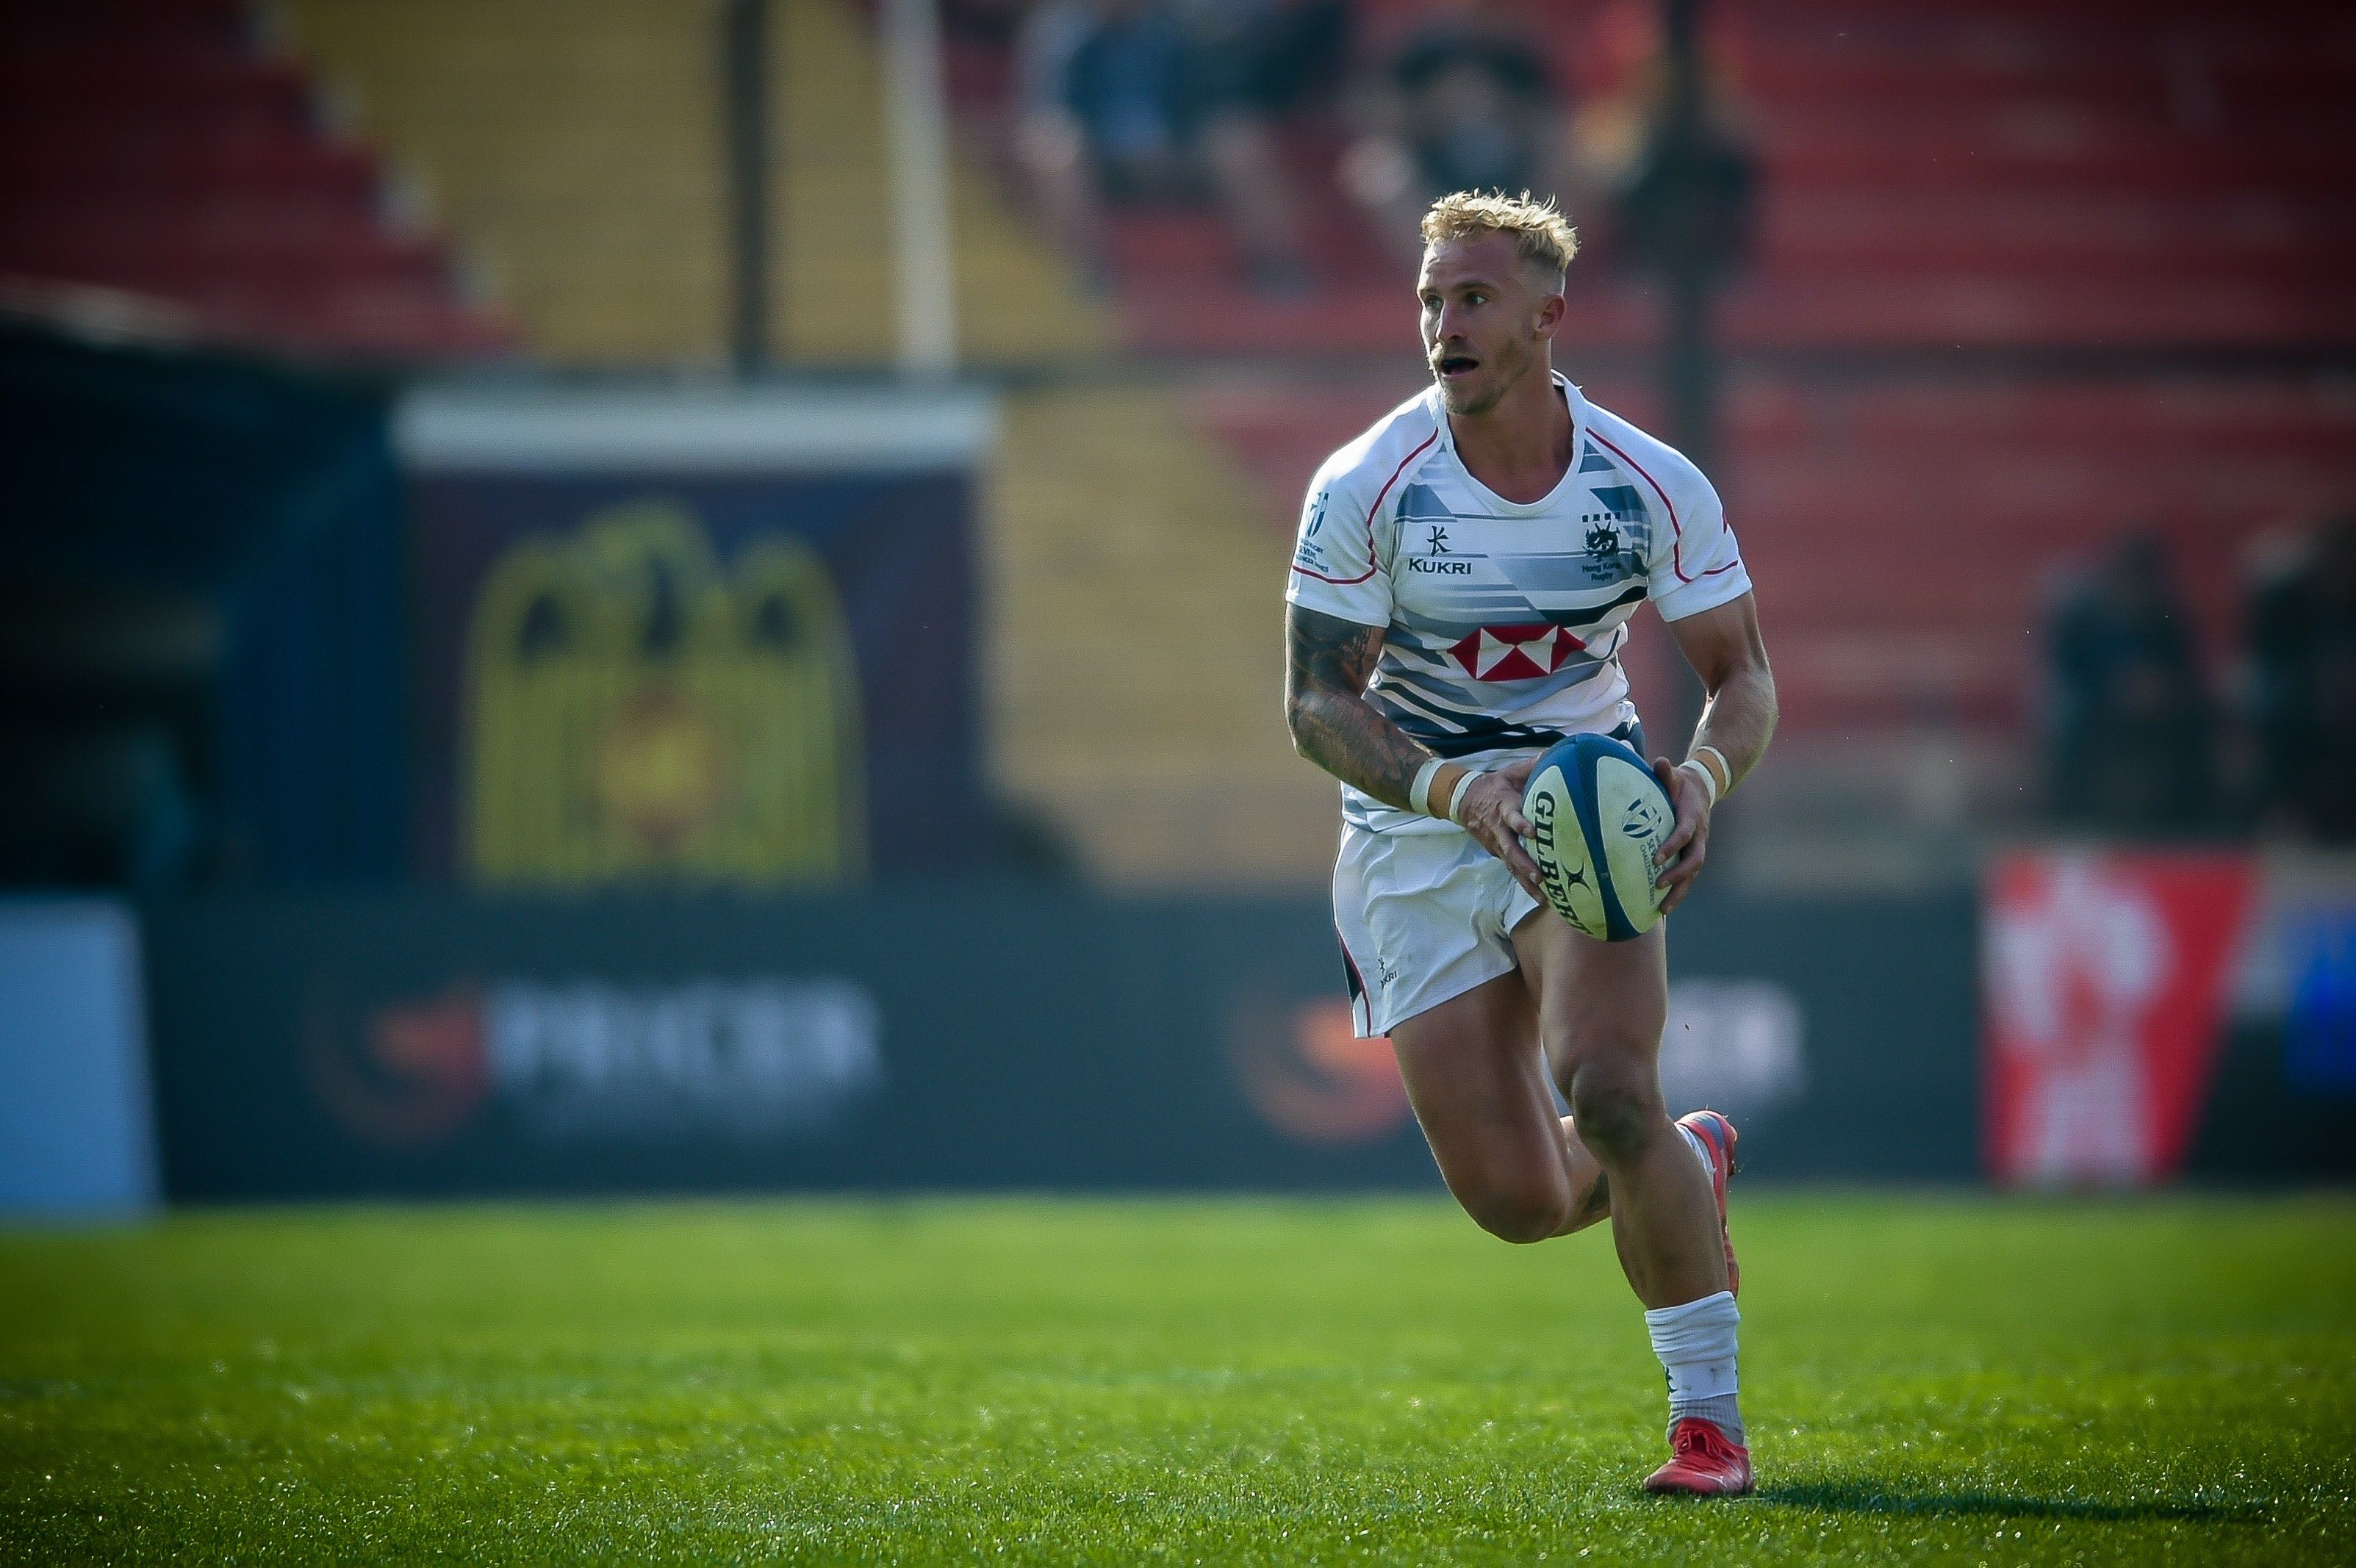 Hong Kong captain Max Woodward will lead his side into battle once more this weekend. Photo: Fotogramax